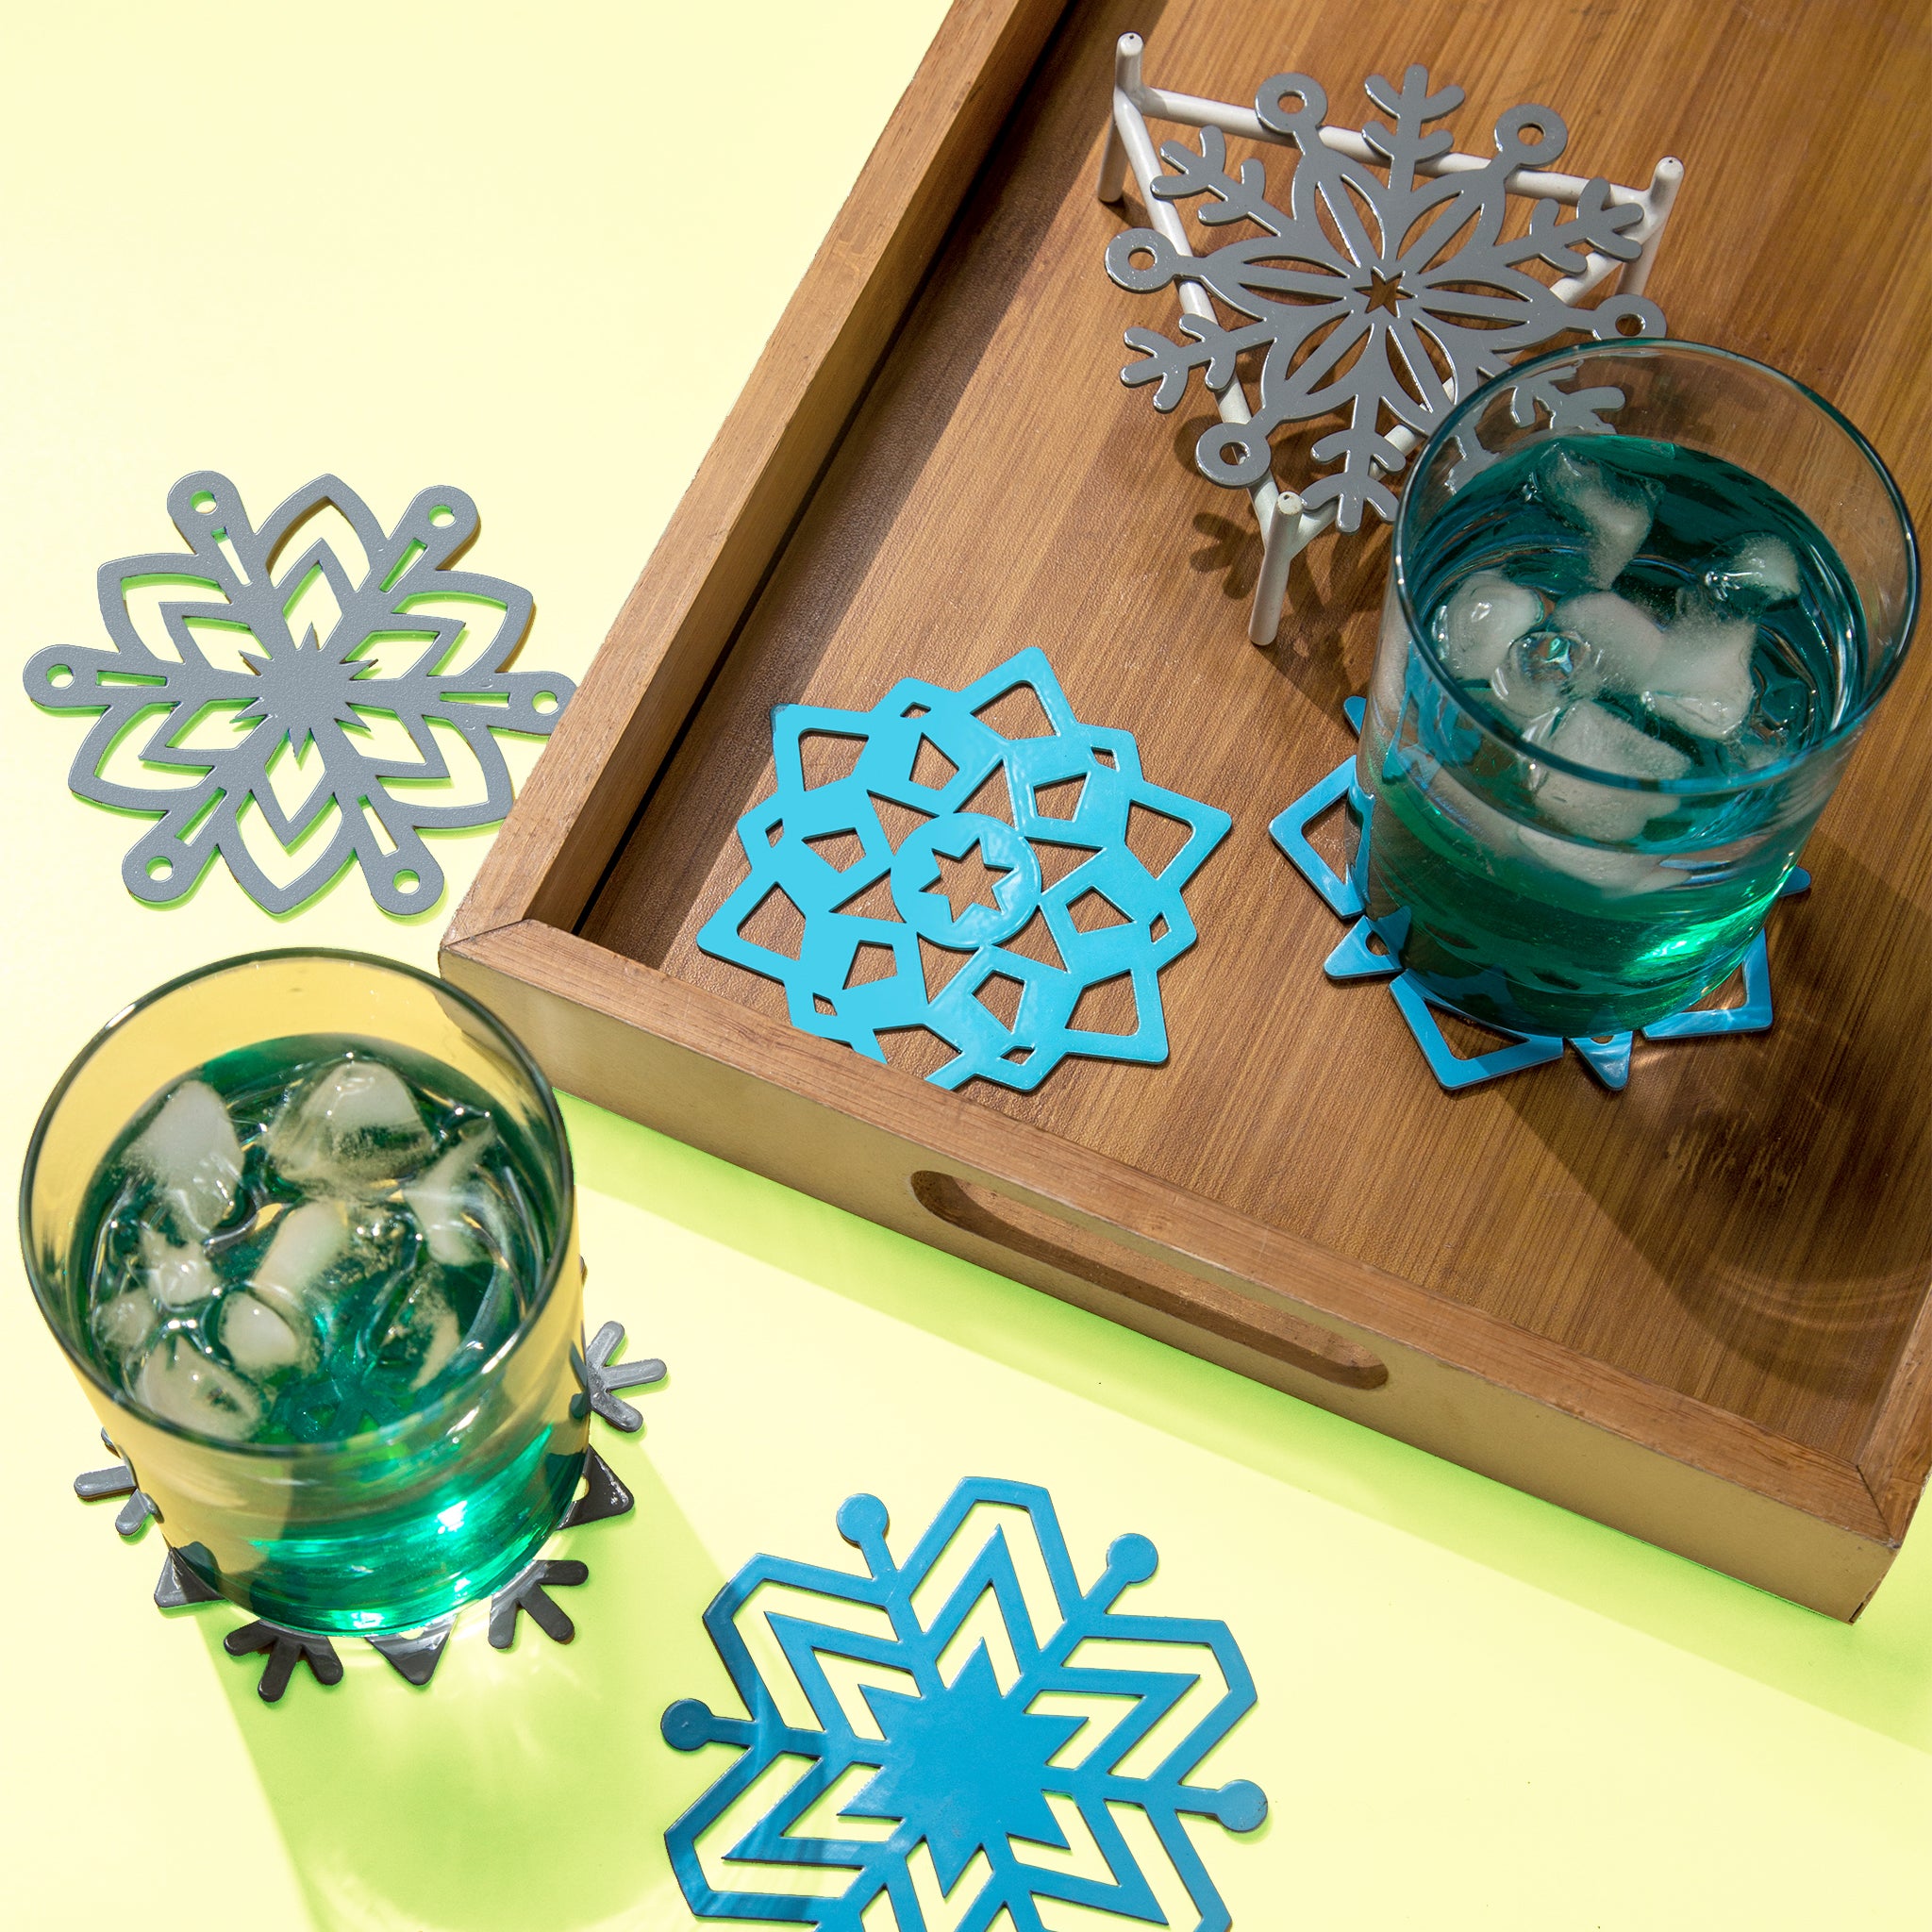 ReStory Lappi Unique Snowflakes Metal Coaster set of 6 with holder - blue/white/grey